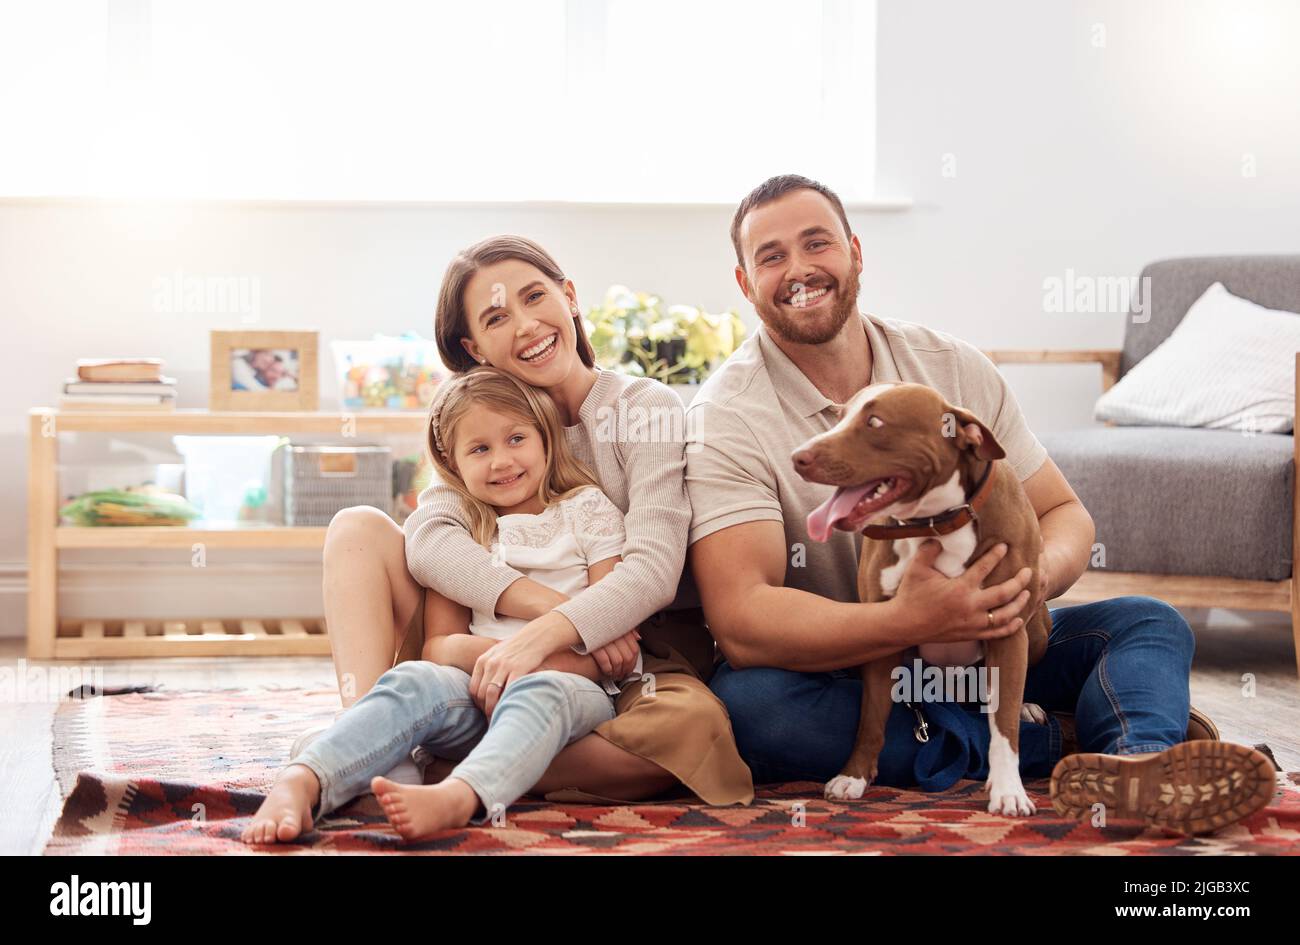 Our little family. Full length shot of a young family sitting with their dog on the living room floor at home. Stock Photo